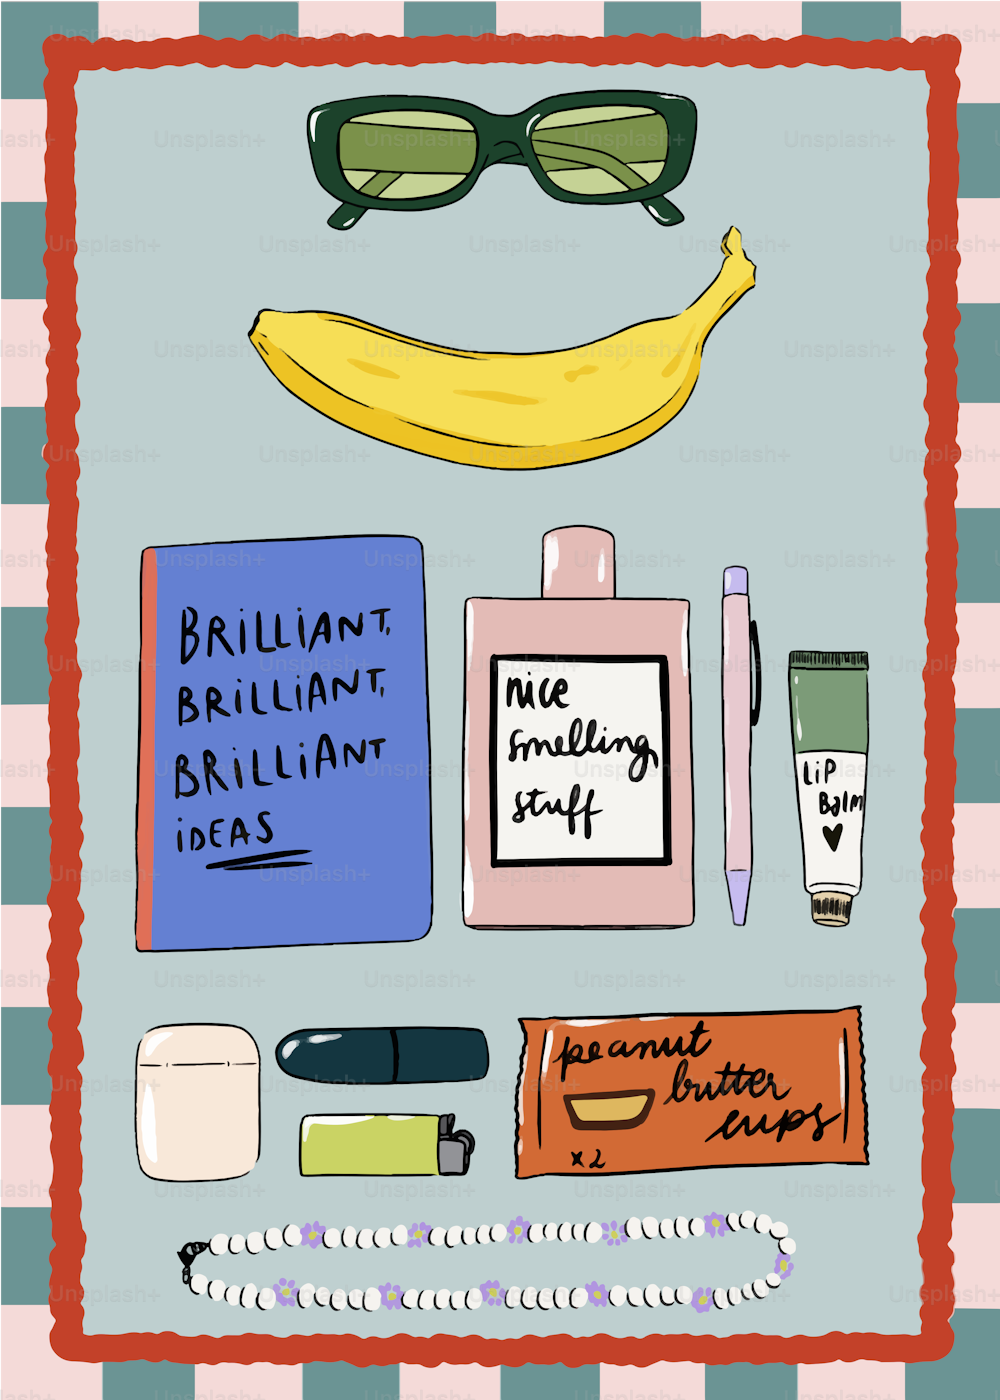 a drawing of a banana, sunglasses, a notepad, and other items